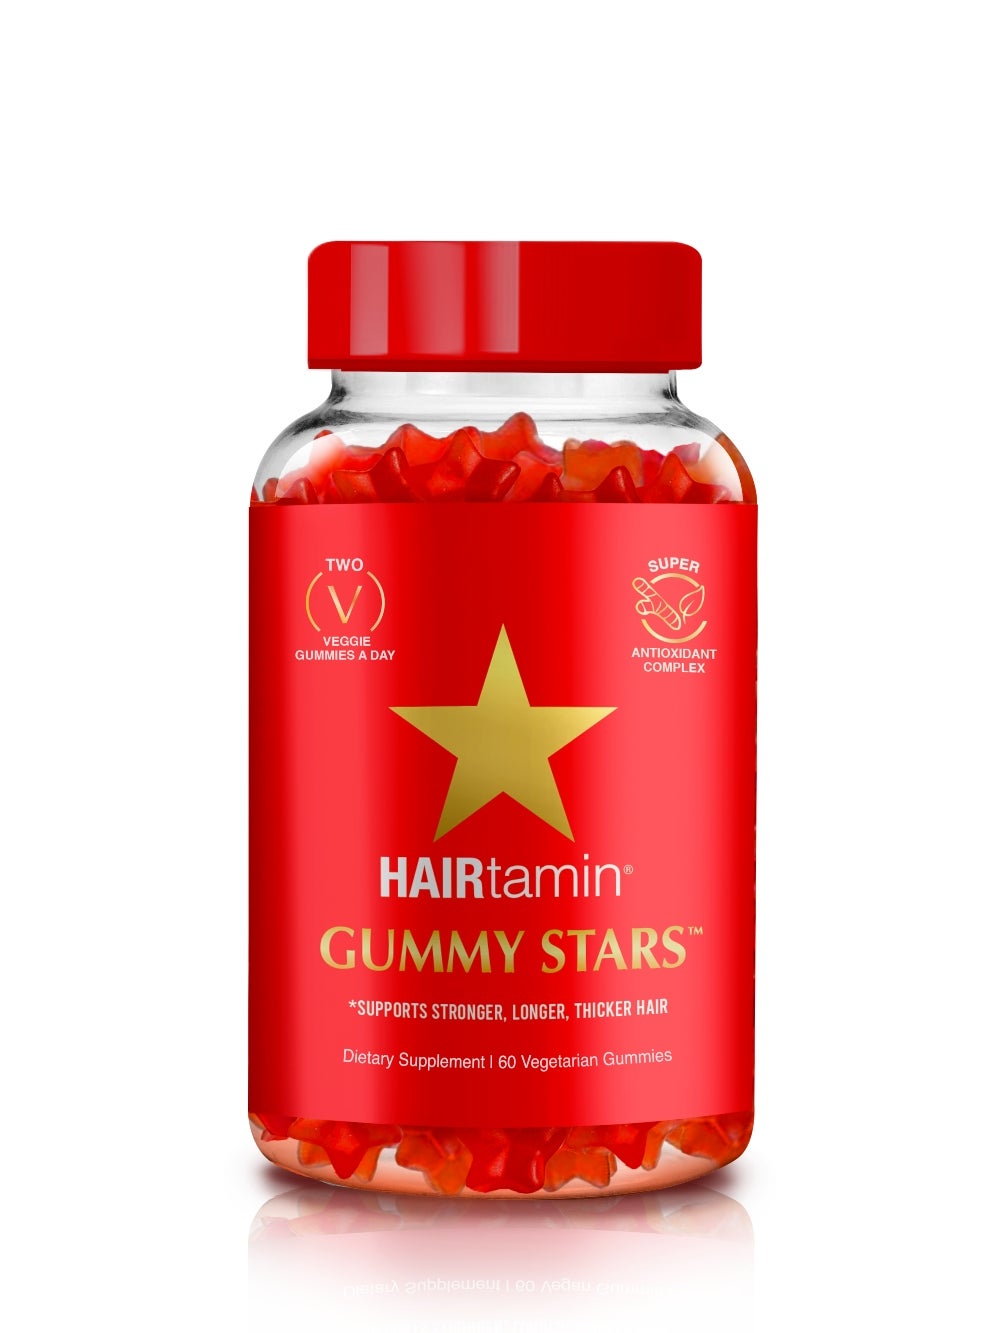 Should Gummy Vitamins Be Added To Your Beauty Routine? Experts Weigh In